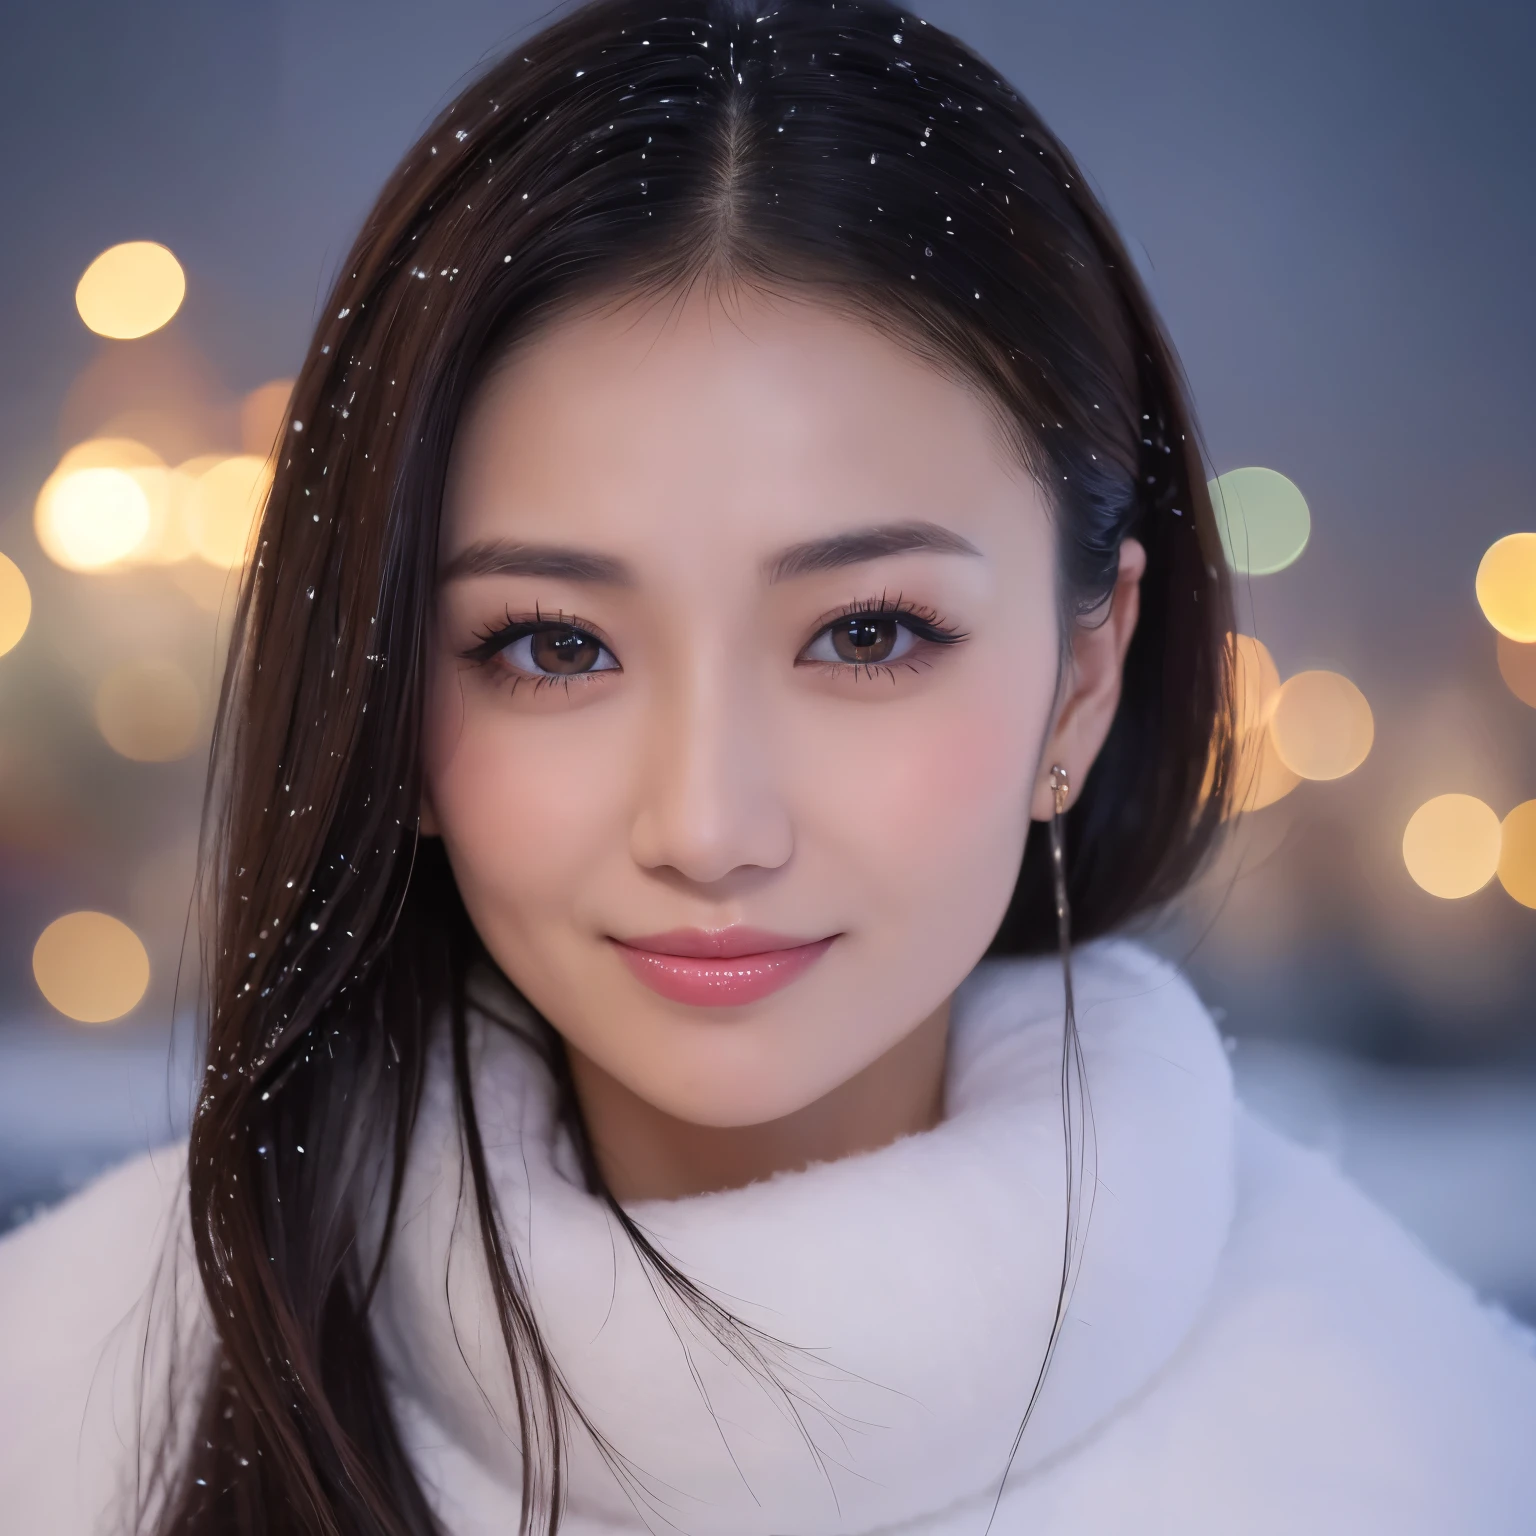 ((highest quality、table top、8K、best image quality、Award-winning work))、one beautiful woman、smile looking at me、(close up of face:1.6)、(The perfect and most natural long muffler:1.2)、(elegant thick coat:1.1)、epic movie lighting、(romantic love feelings:1.1)、(The most romantic and moody atmosphere:1.1)、winter city、Snowy landscape in the city、(The snow in the air sparkles finely:1.1)、(It&#39;s snowing heavily:1.1)、(Tyndall effect:1.1)、(Night view of the city with snow falling:1.2)、Shining beautiful skin、(accurate anatomy:1.1)、Ultra high definition beauty face、long eyelashes、natural makeup、ultra high definition hair、Ultra high definition eyes、(Shining beautiful skin with ultra-high resolution:1.1)、Super high resolution glossy lips、radiant beautiful skin